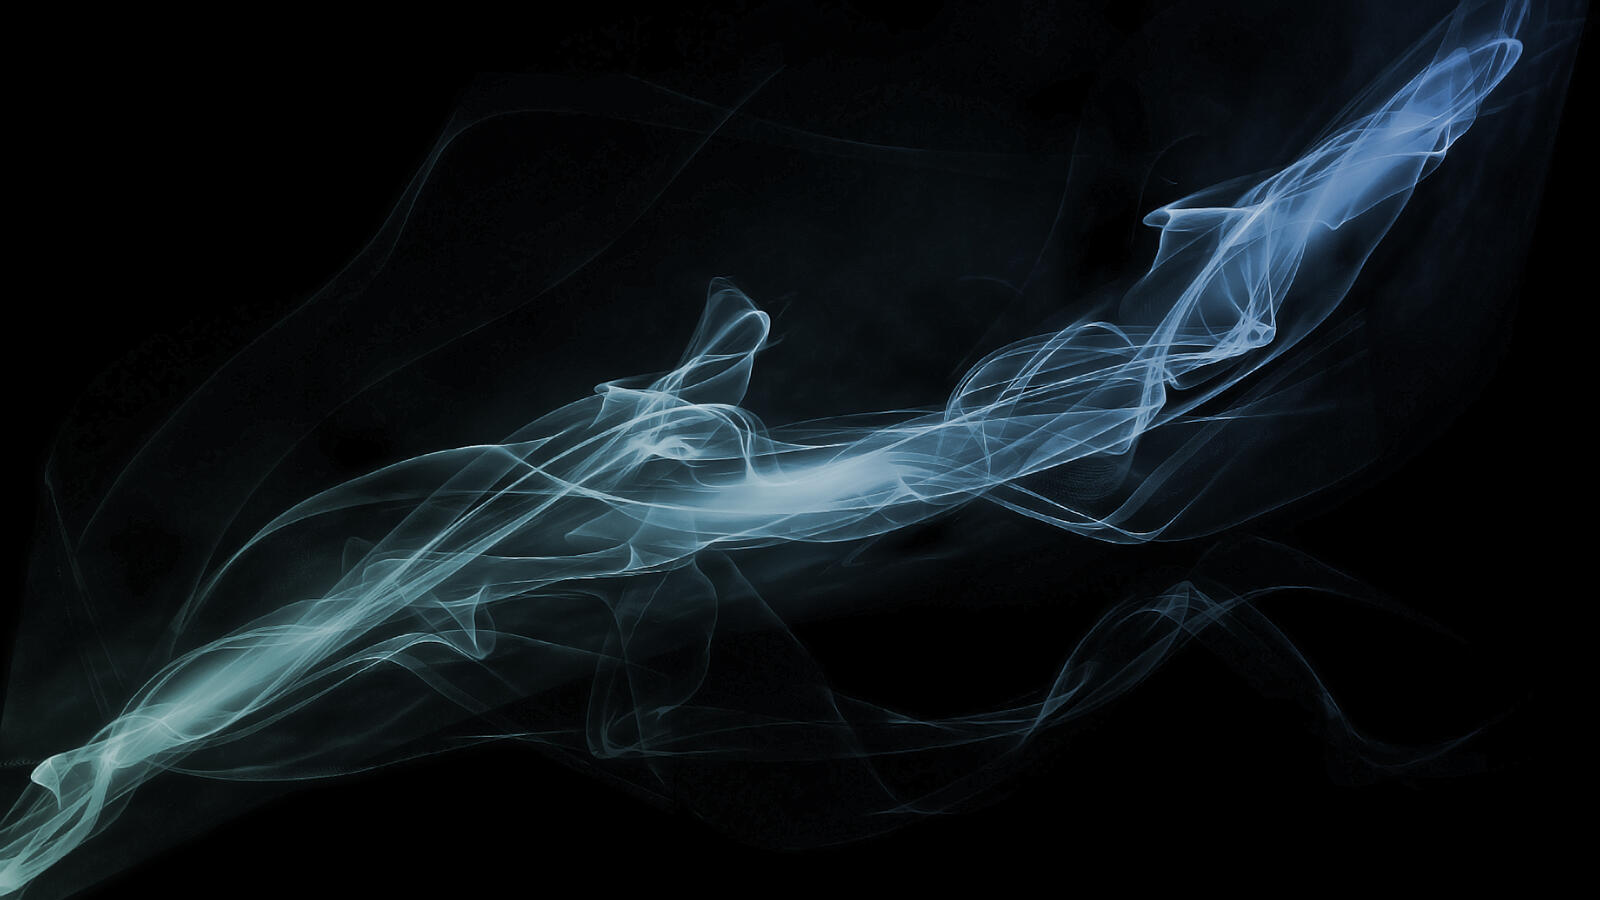 Wallpapers smoke black background cold on the desktop